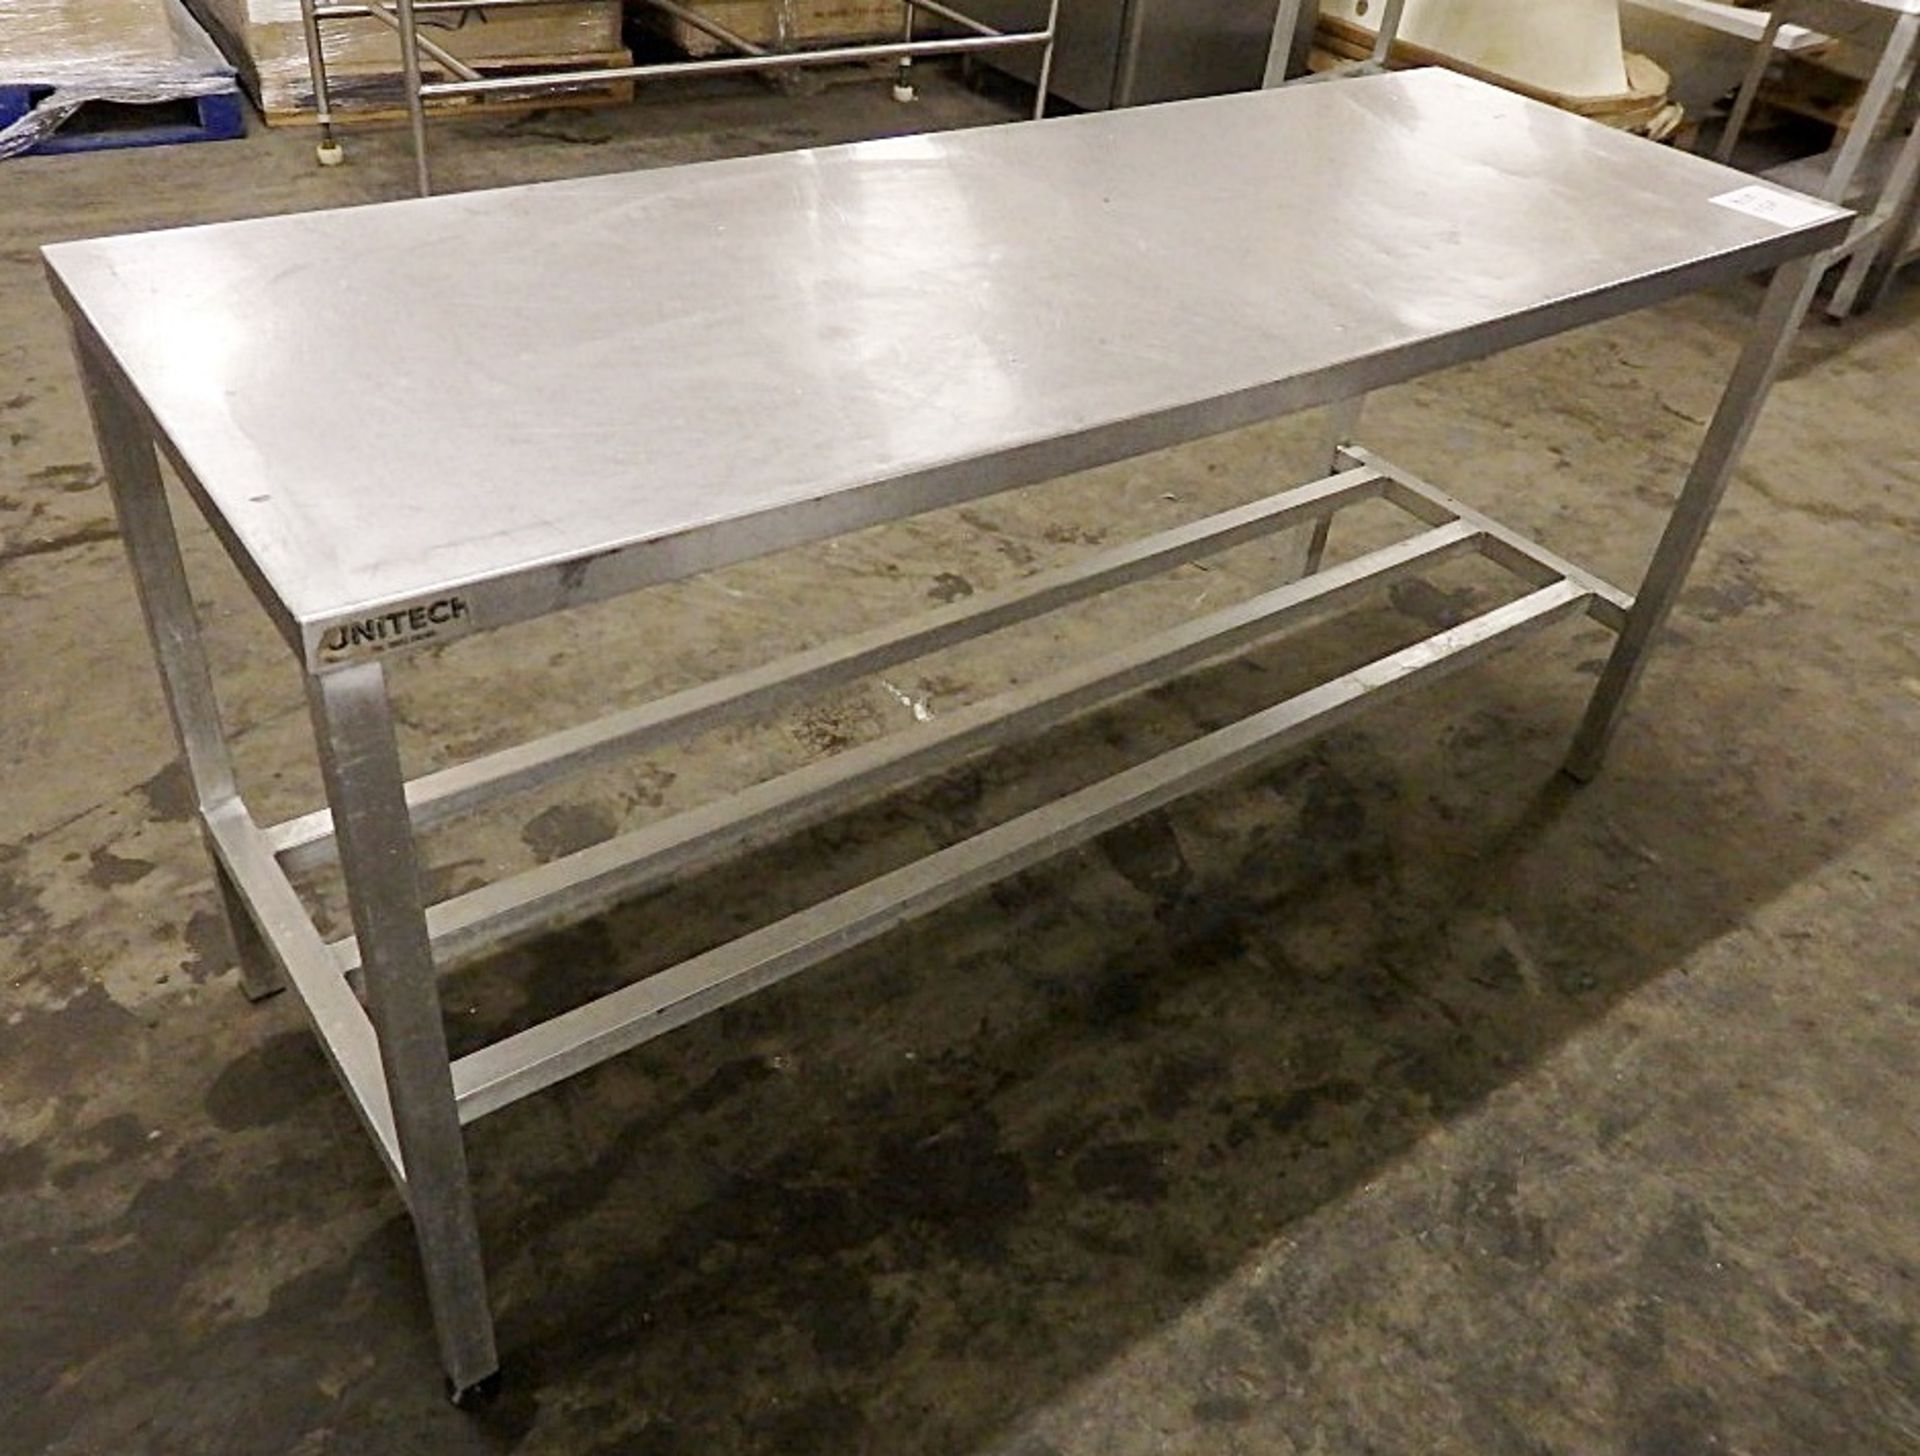 1 x Long Stainless Steel Catering Preparation Table Frame - Dimensions: W176 x D62 x H84cm - Solid - Image 3 of 5